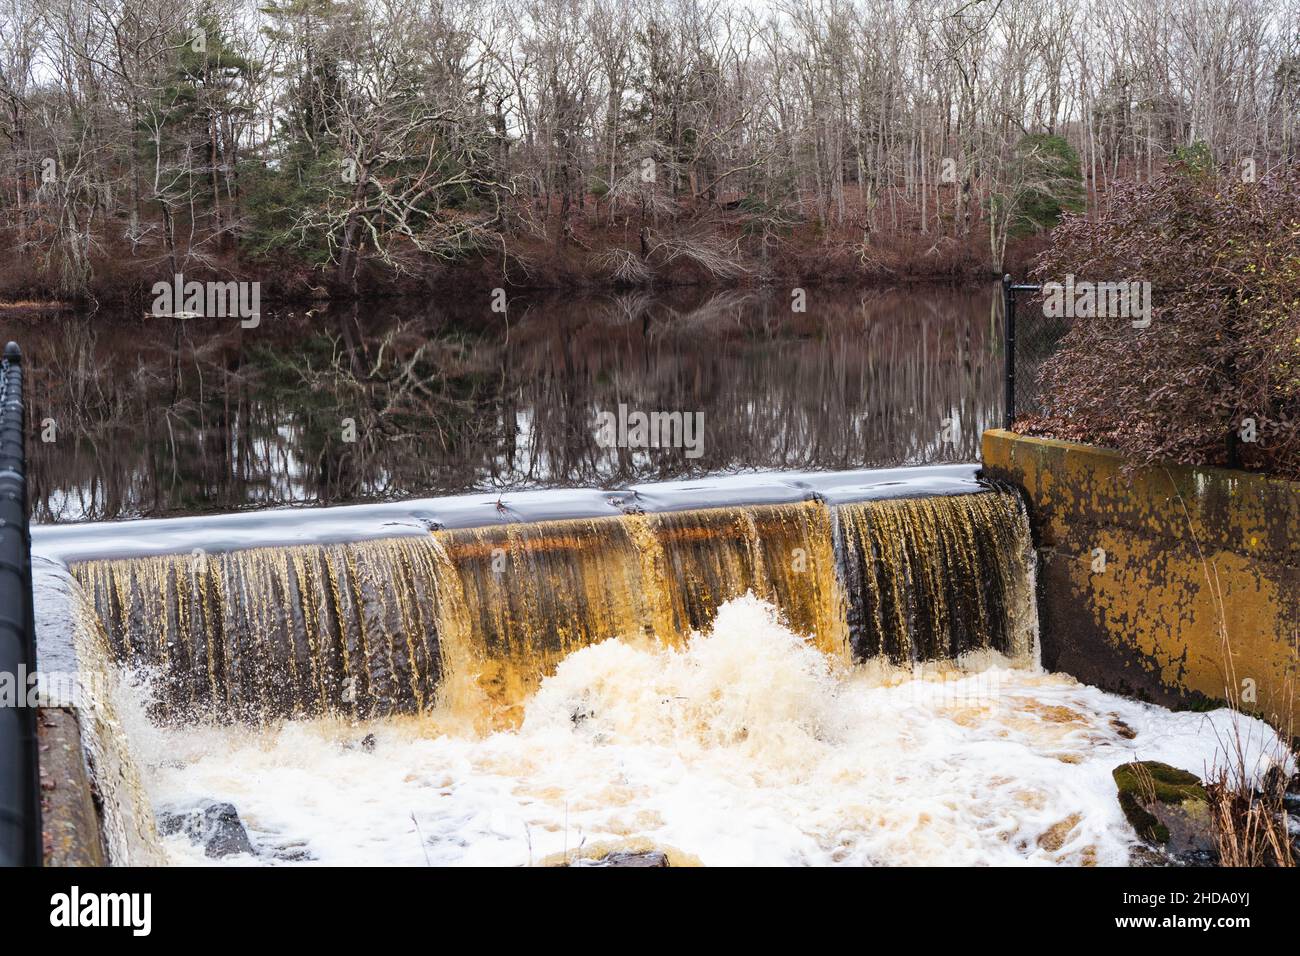 Dried Tree Leaves besides Flowing River and Man-made Dam. This photo was captured in white mountains. Stock Photo